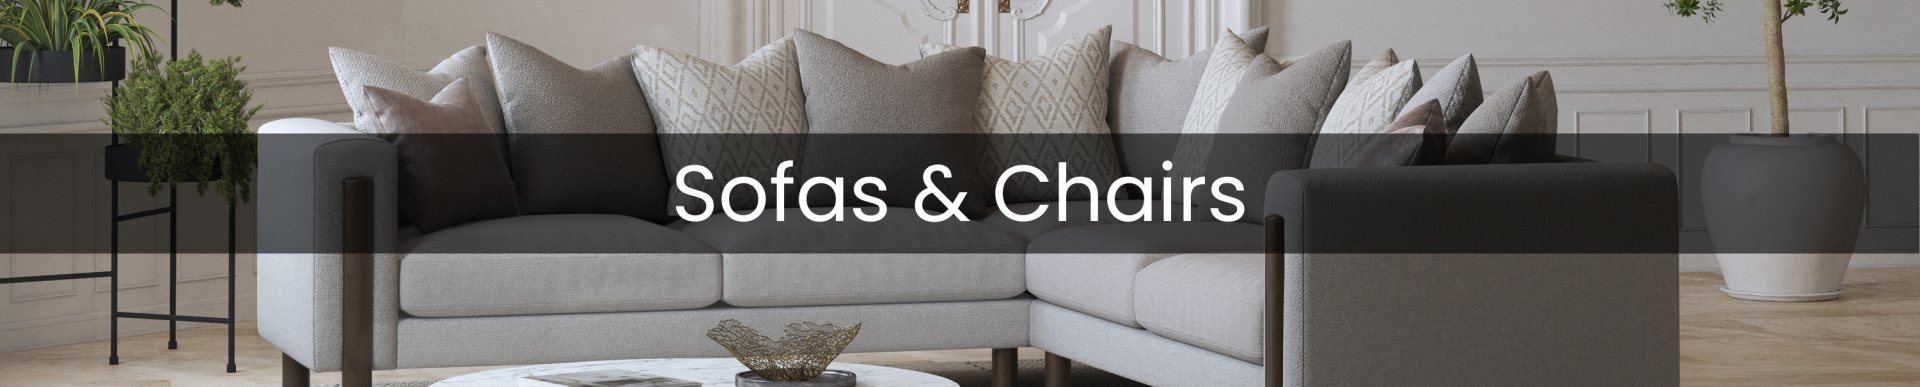 Sofas & Chairs